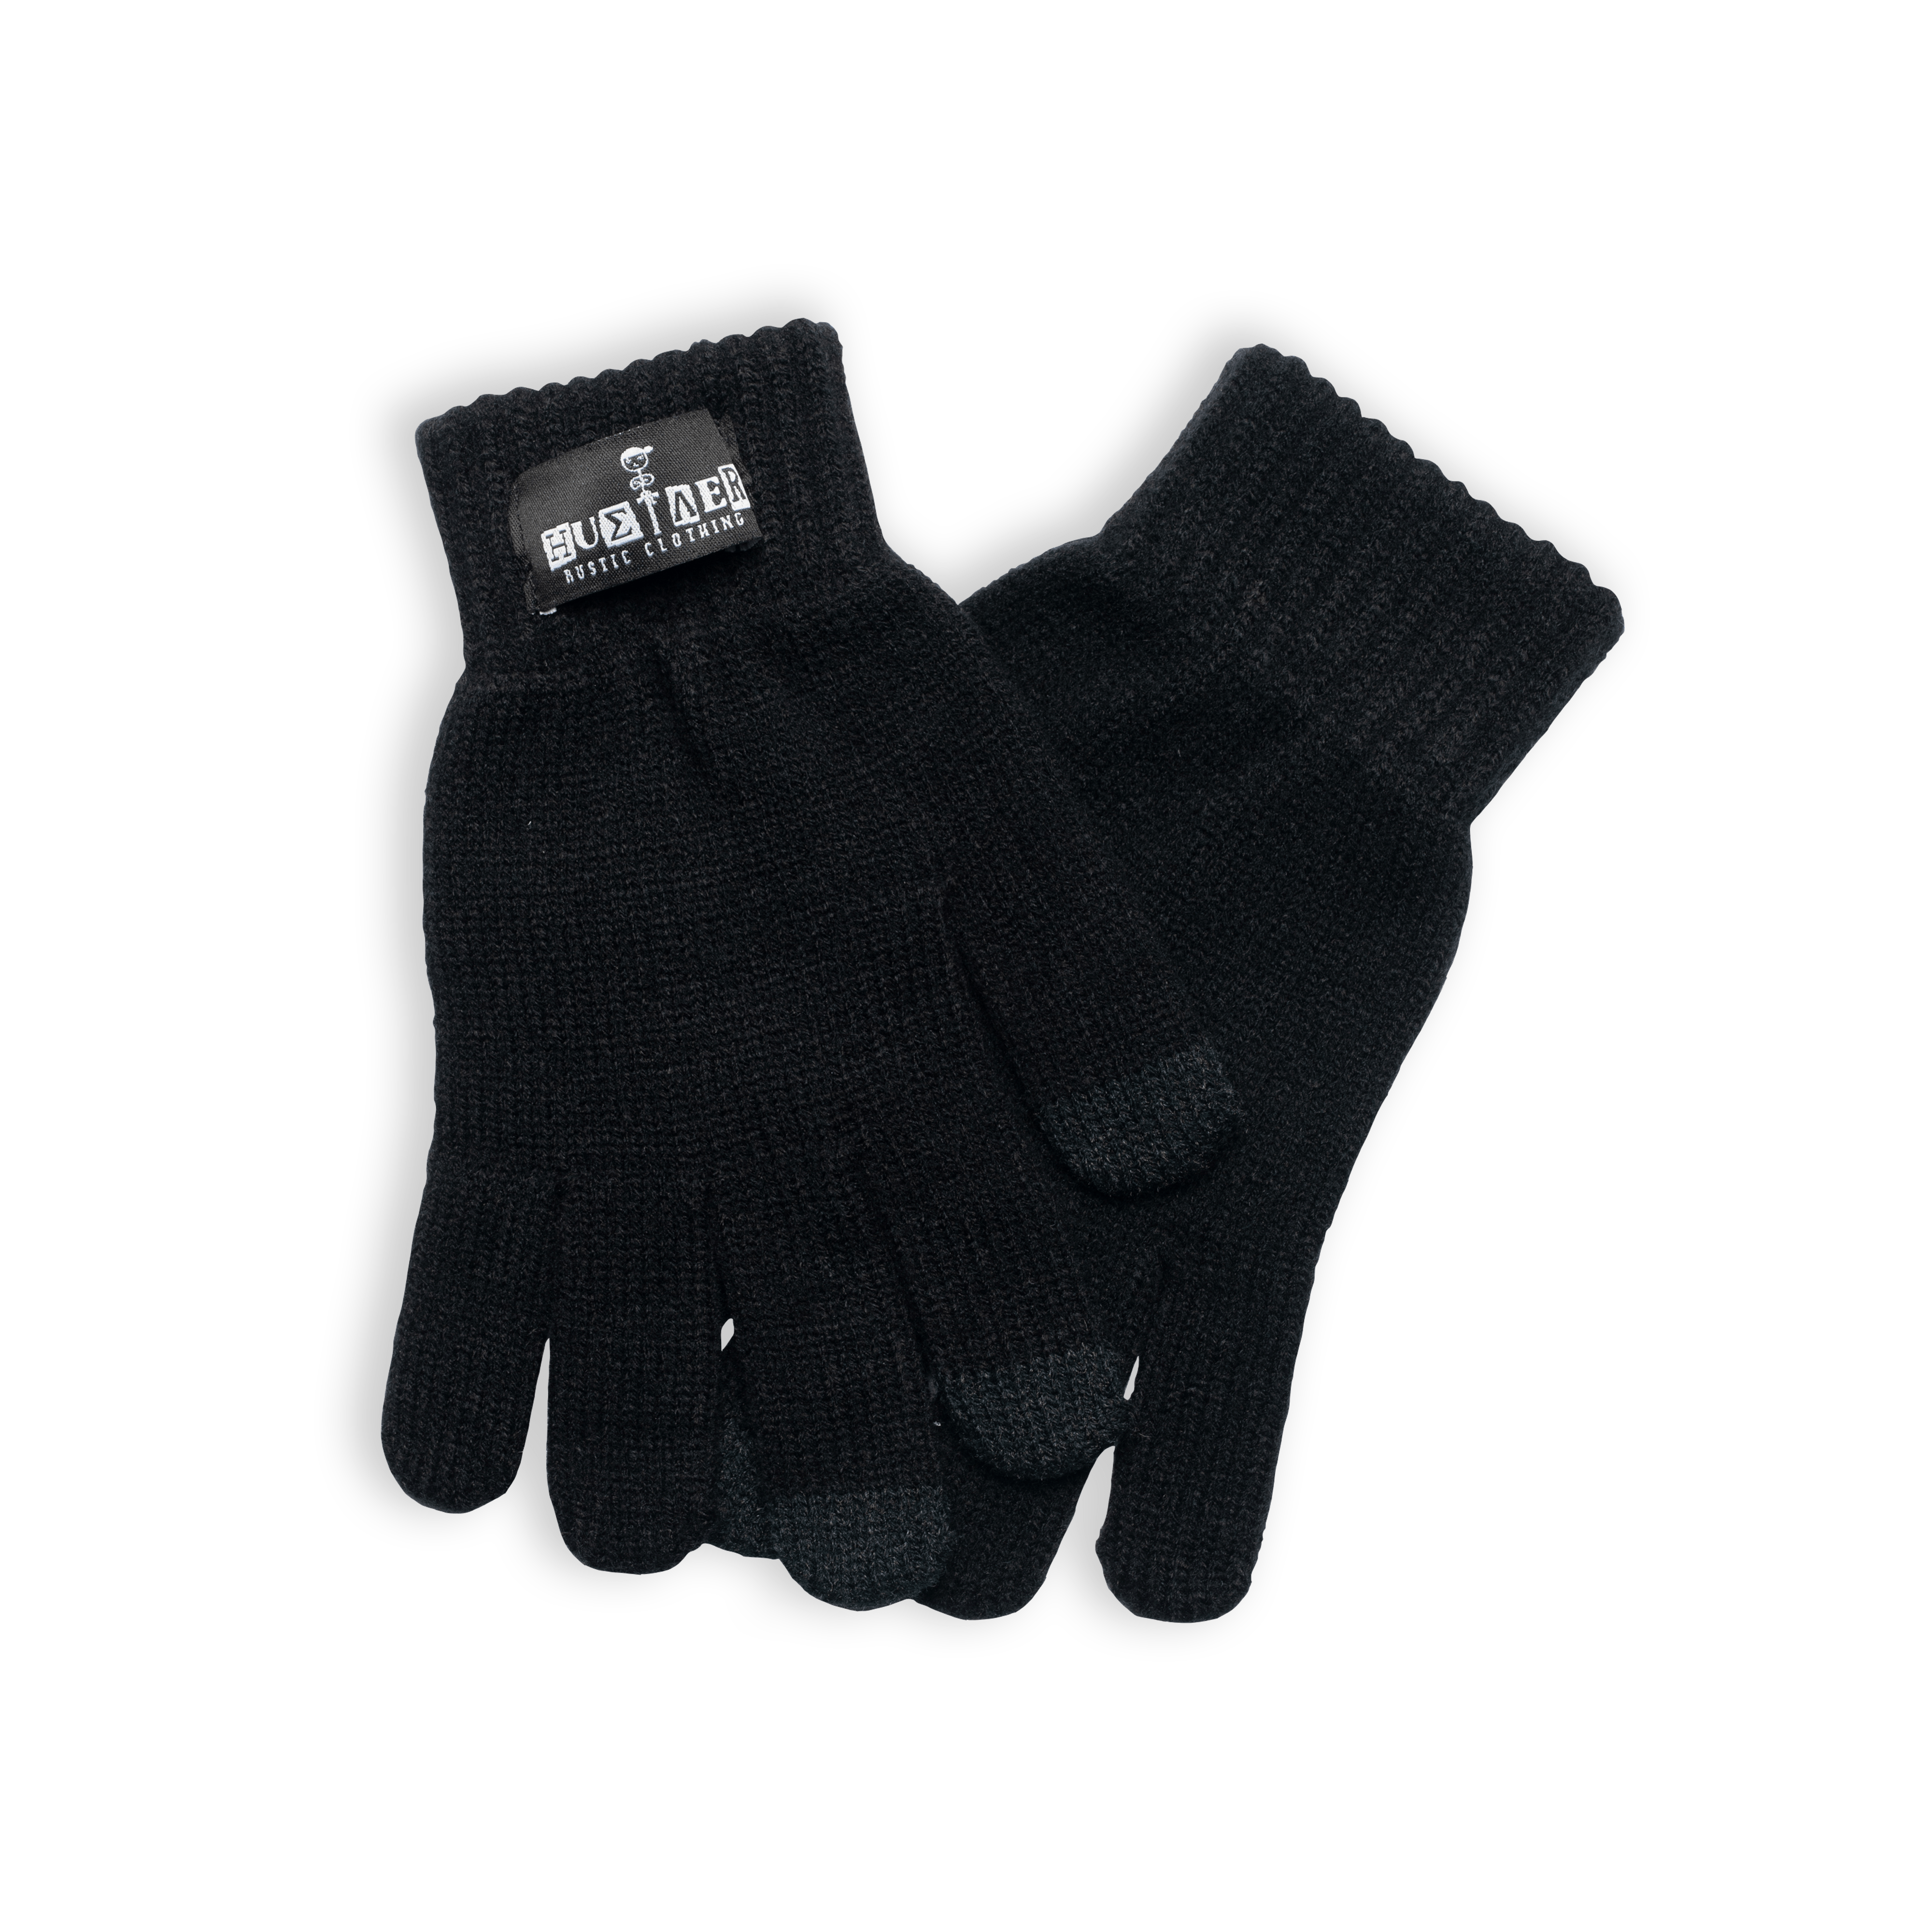 Hustler Gloves With Phone Touch